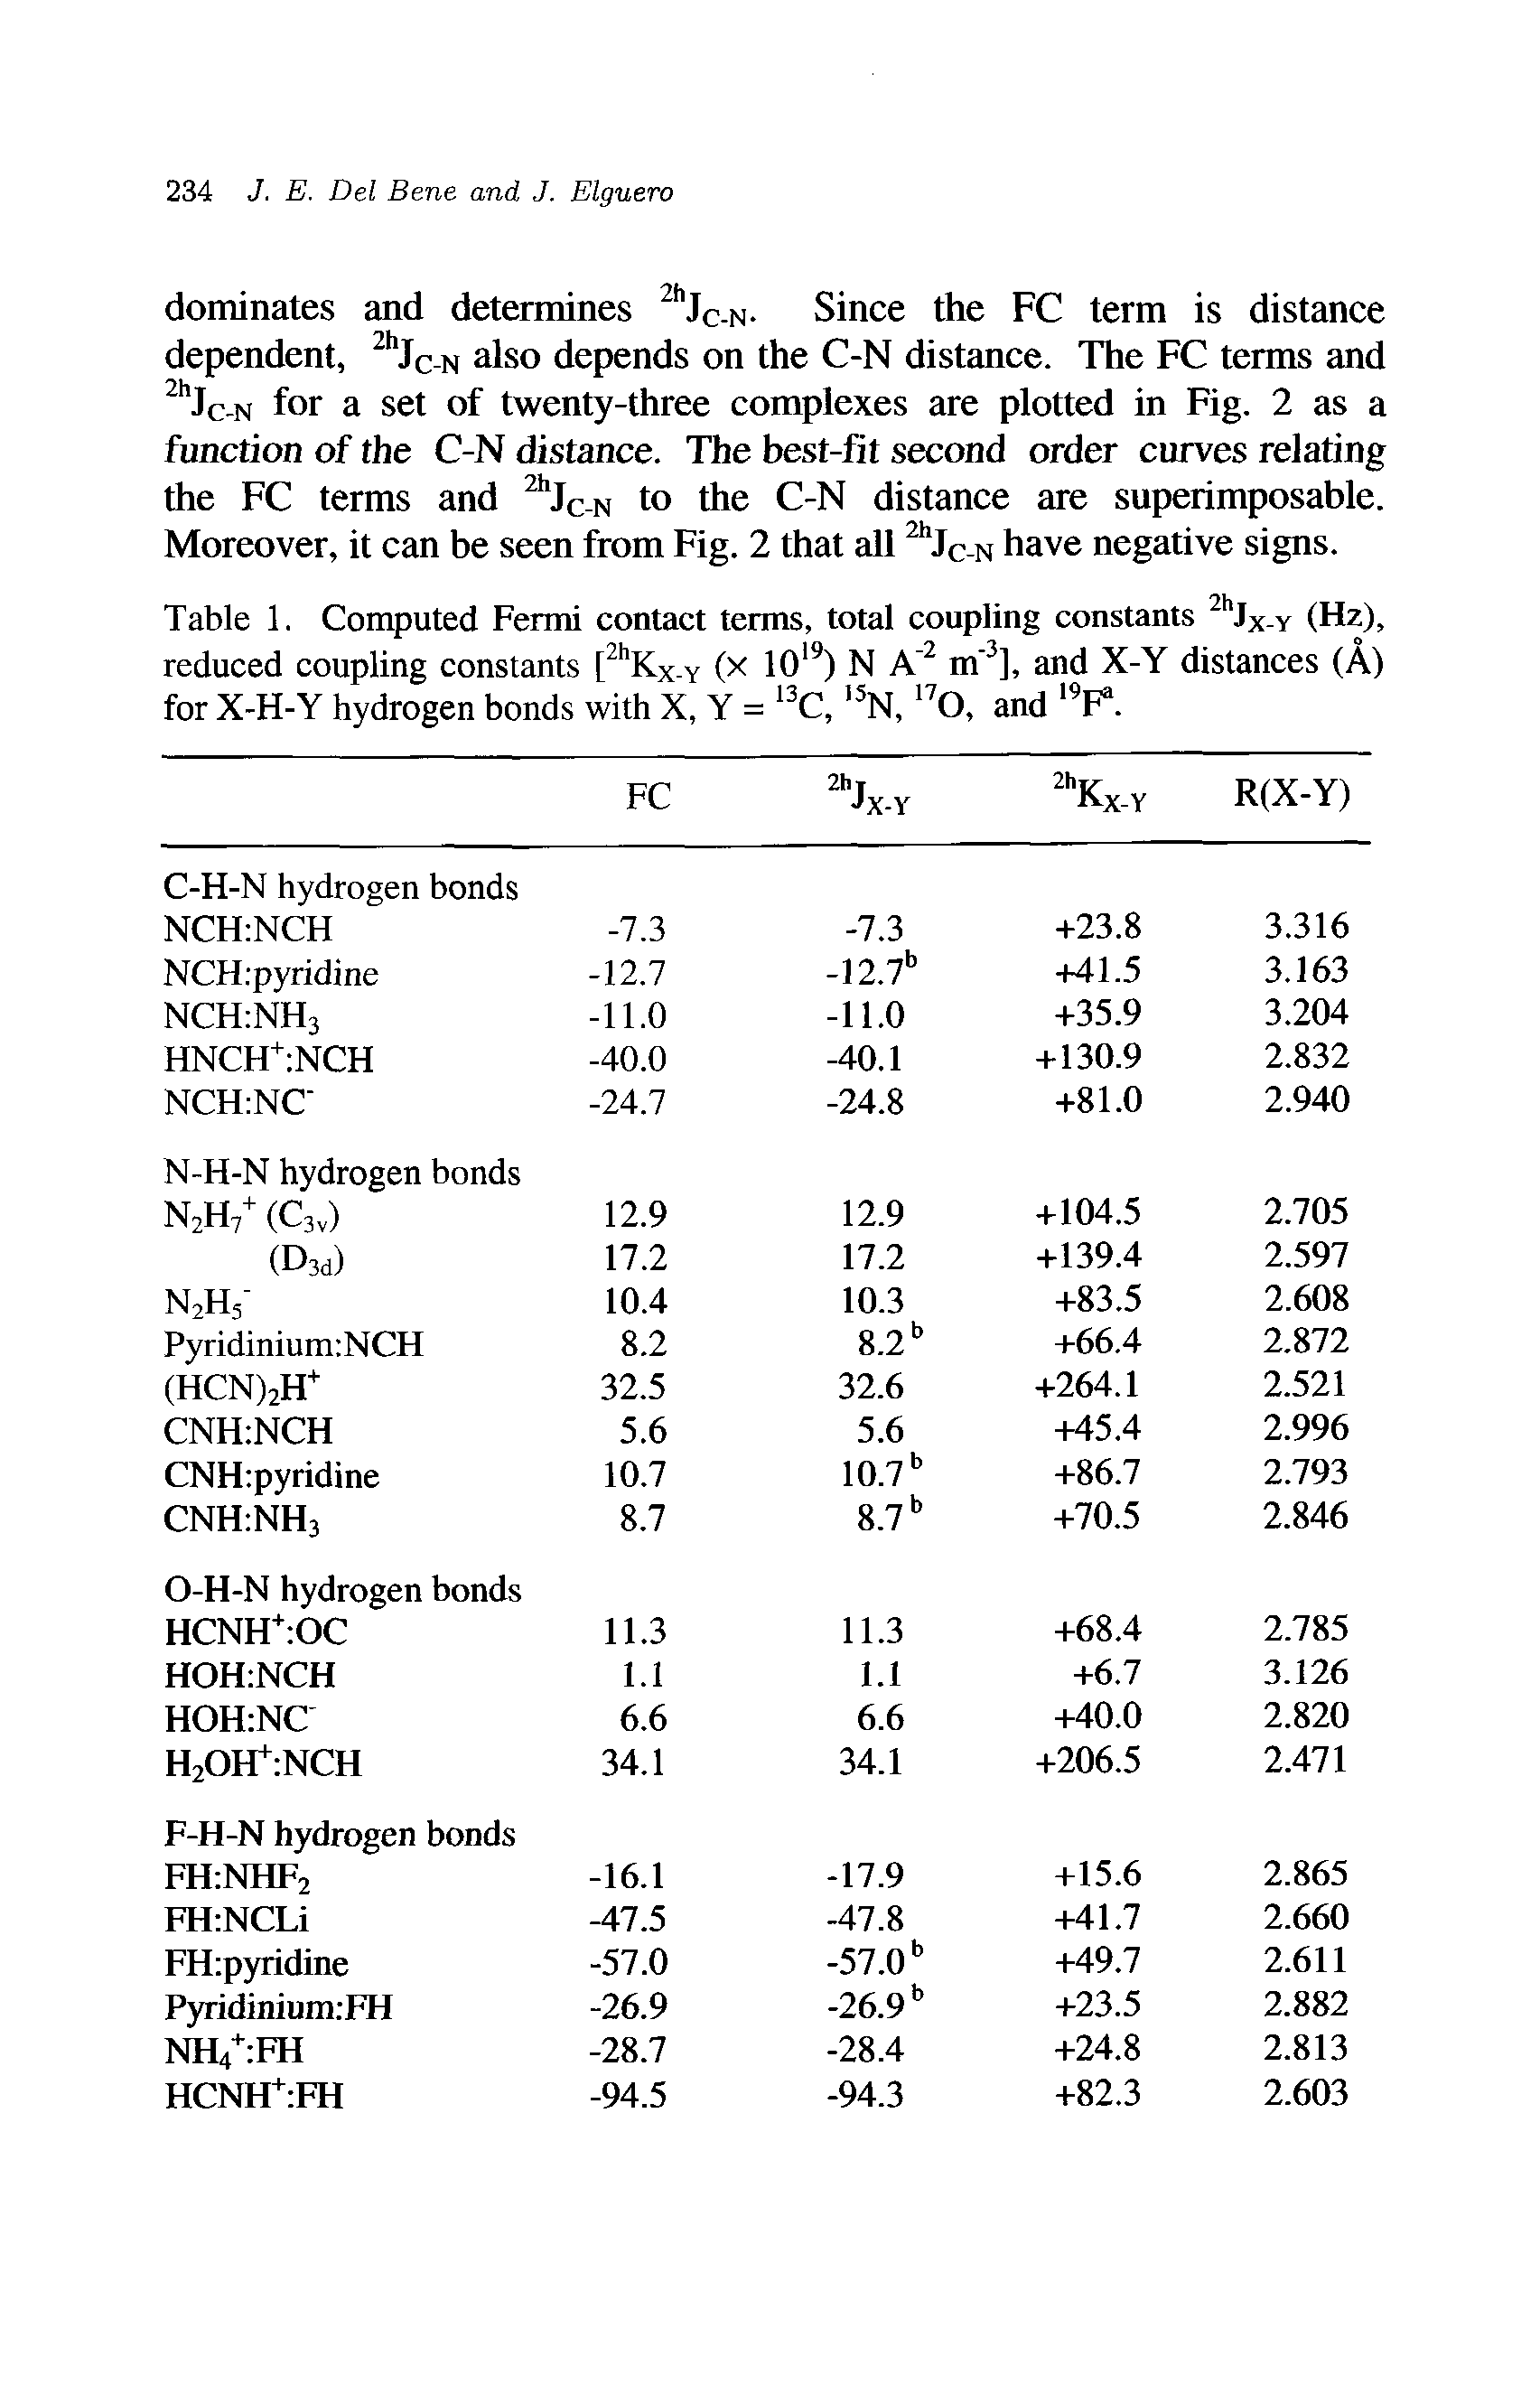 Table 1. Computed Fermi contact terms, total coupling constants 2hJX-y (Hz), reduced coupling constants [2hKX-Y (x 1019) N A"2 m 3], and X-Y distances (A) for X-H-Y hydrogen bonds with X, Y = 13C, 15N, 170, and F2.